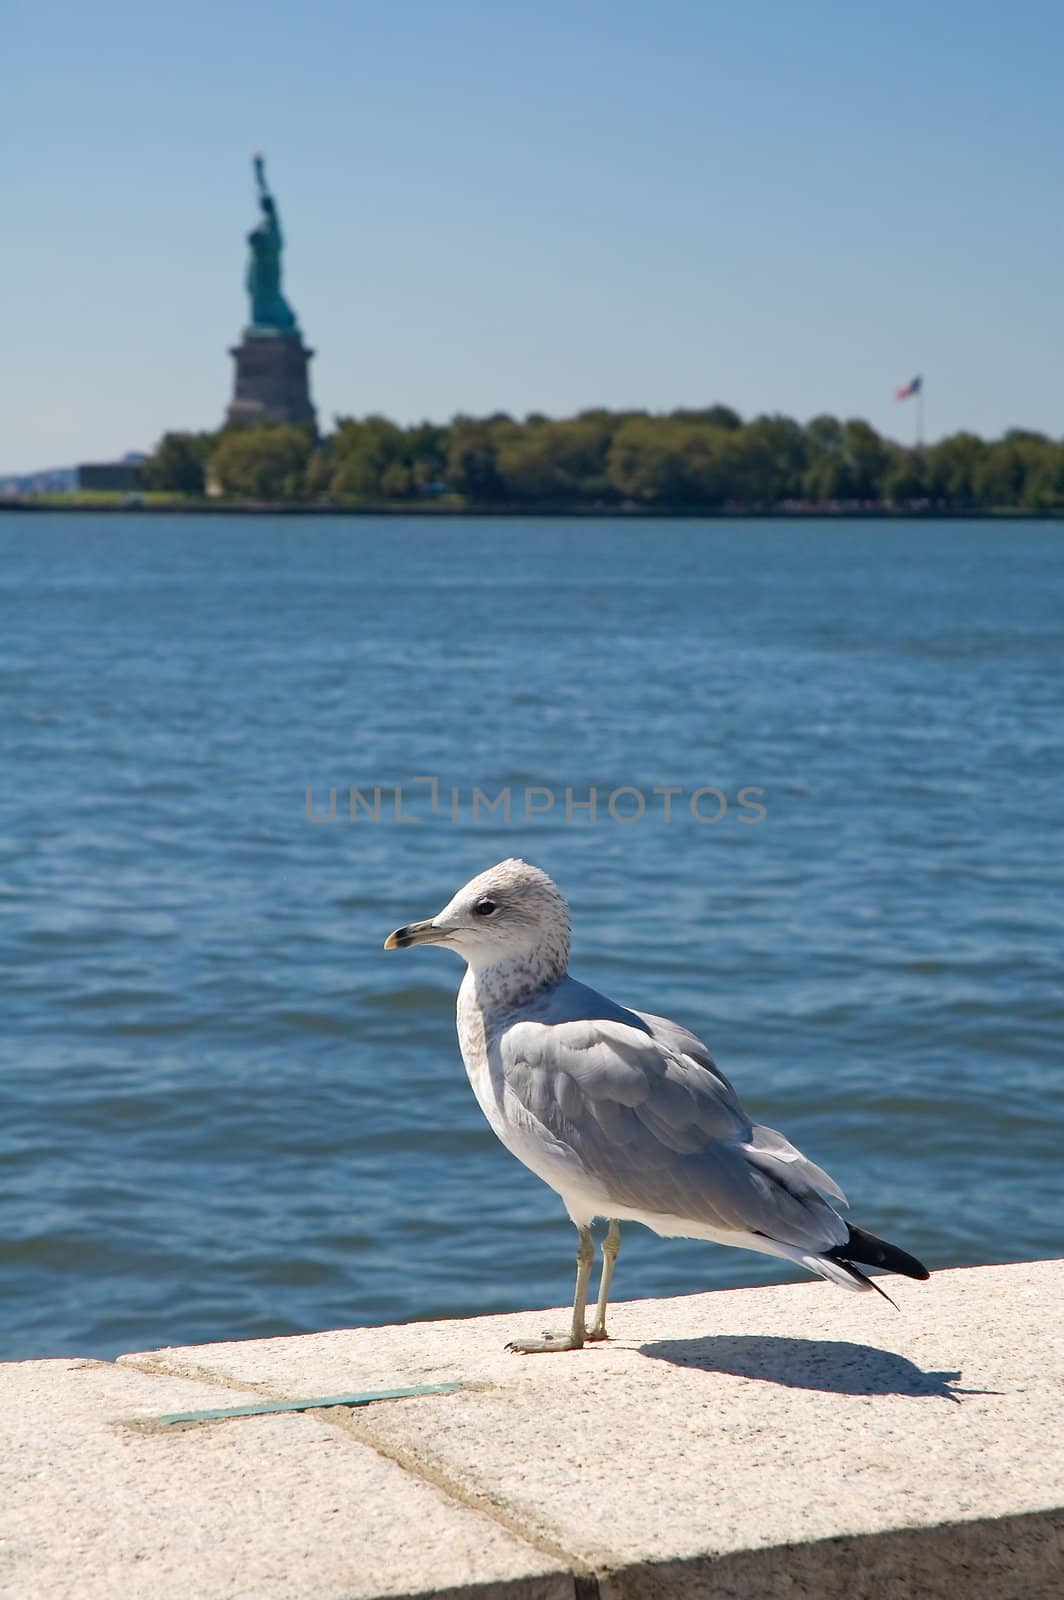 Sea gull standing on a concrete railing at ellis island, statue of liberty blured in background,